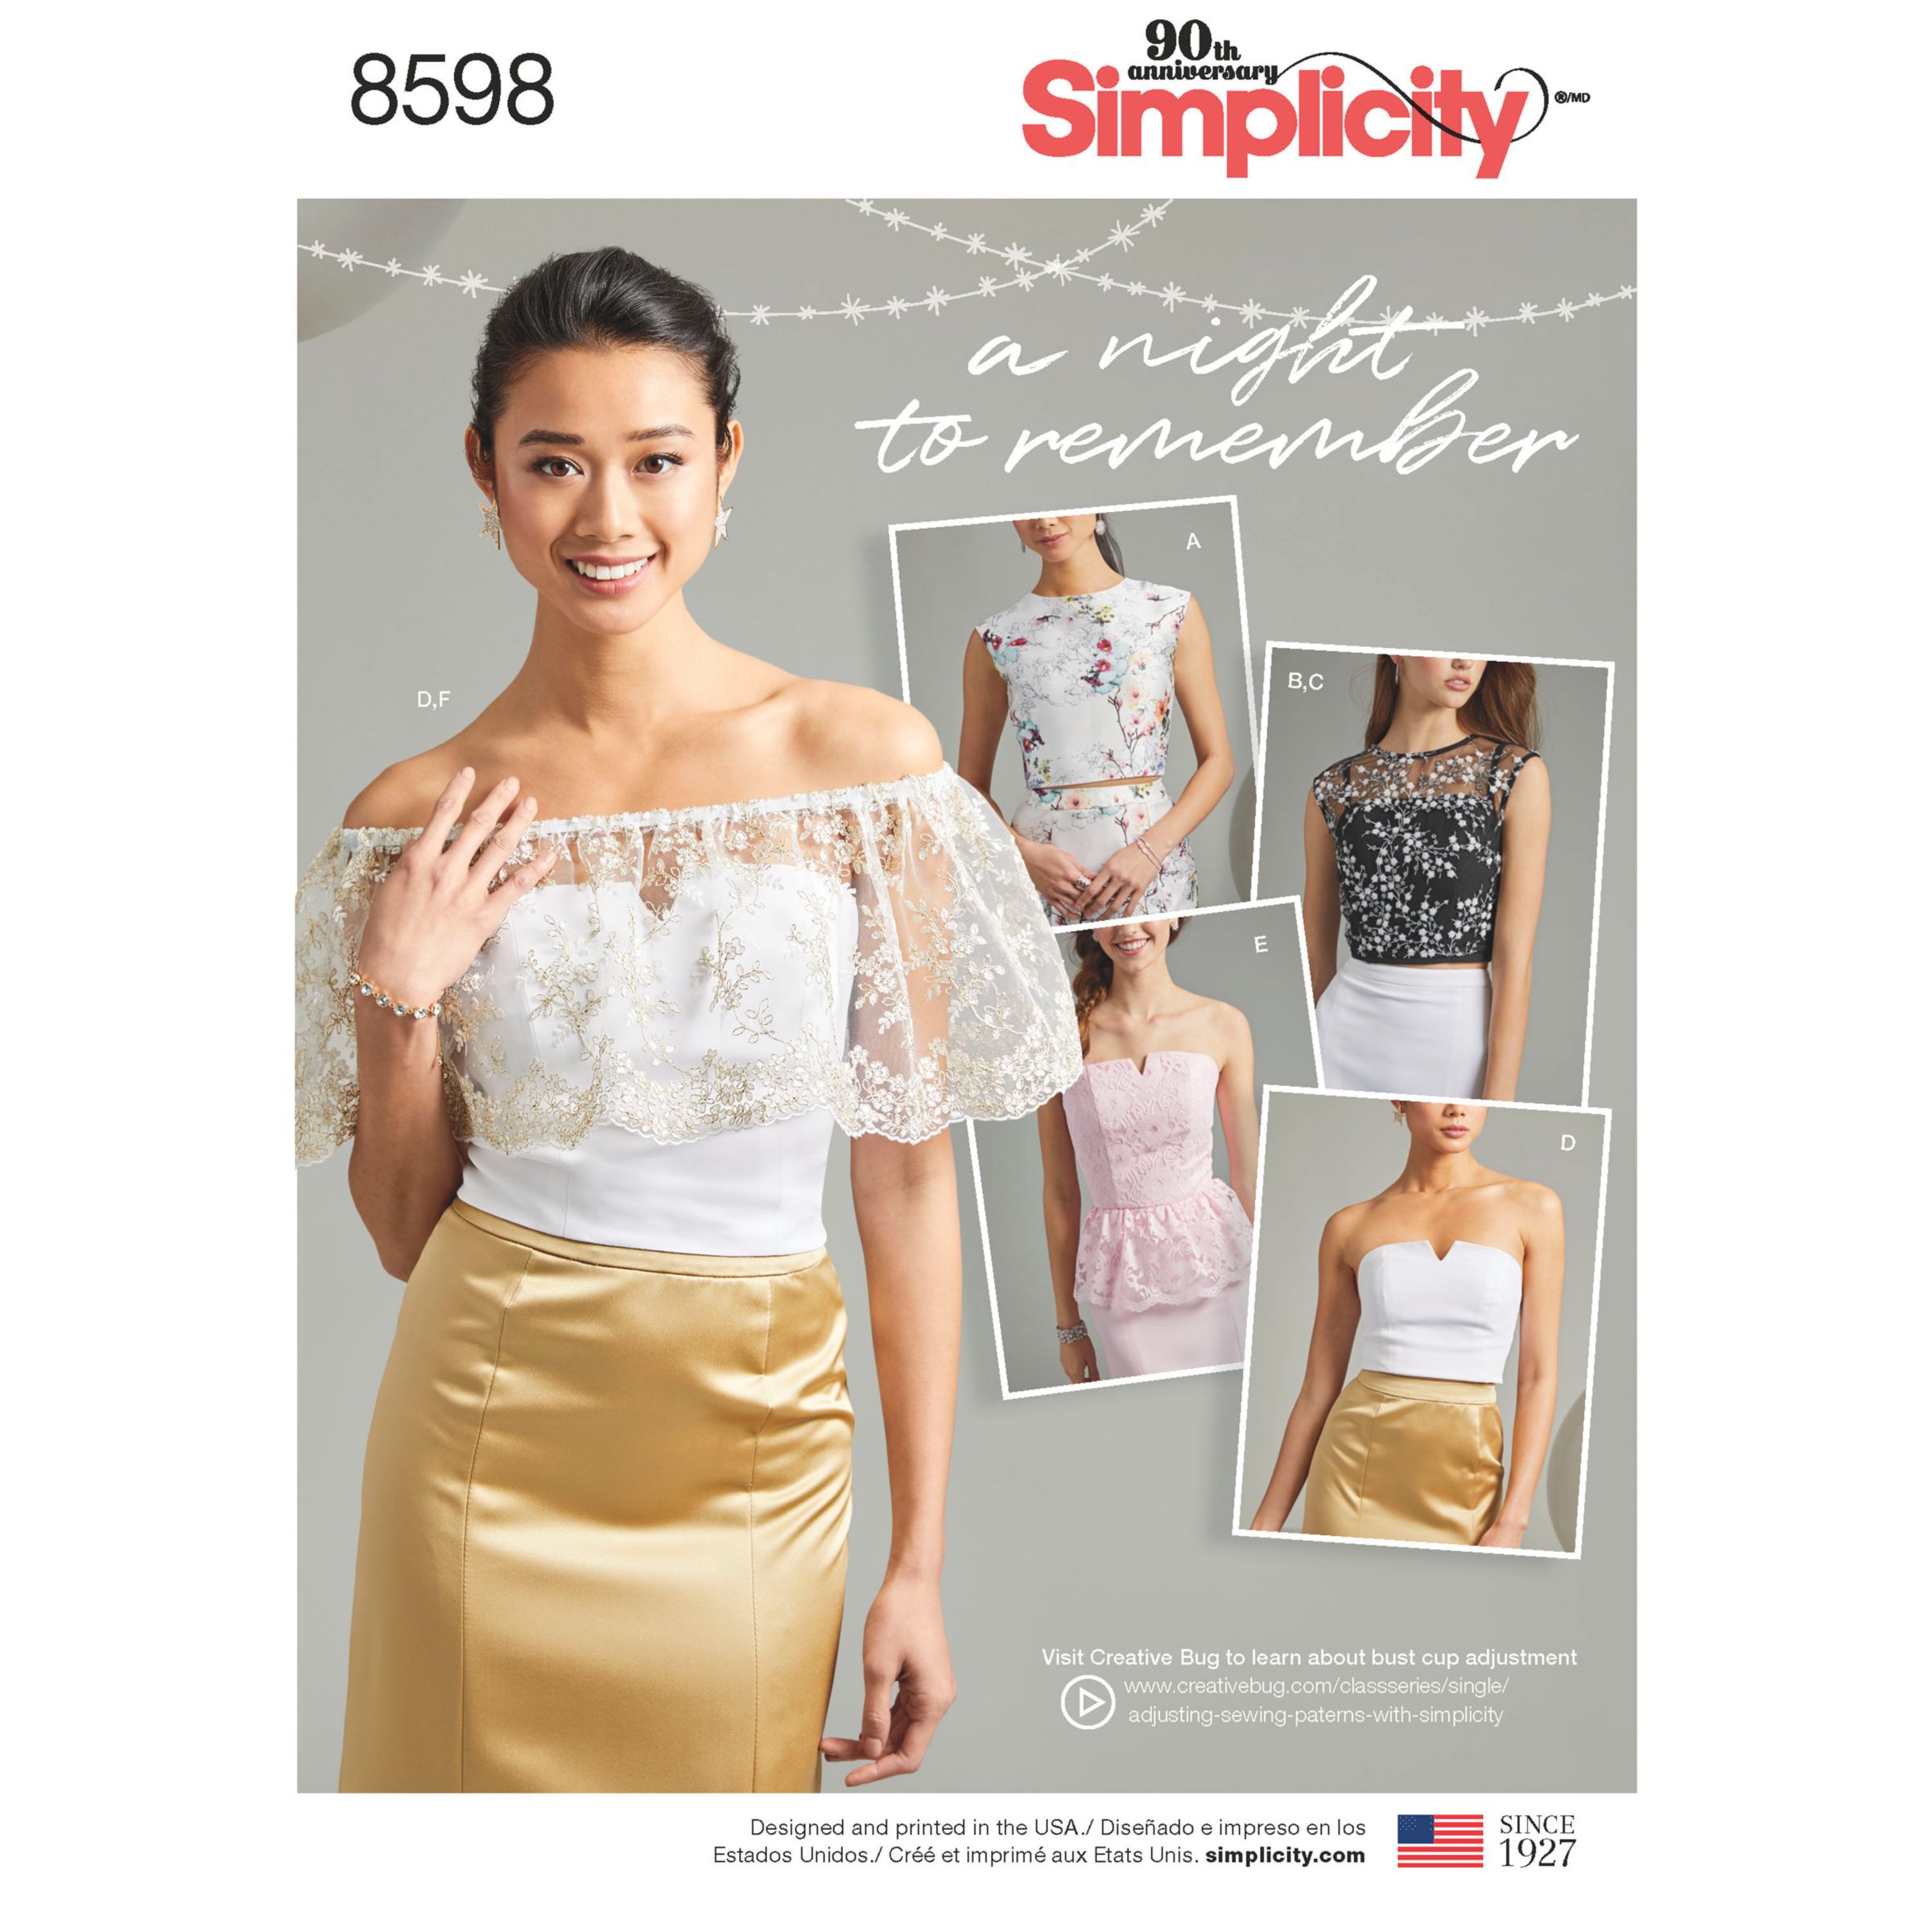 New Simplicity 8328 Pattern Special Occasion Tops and Skirts in 2